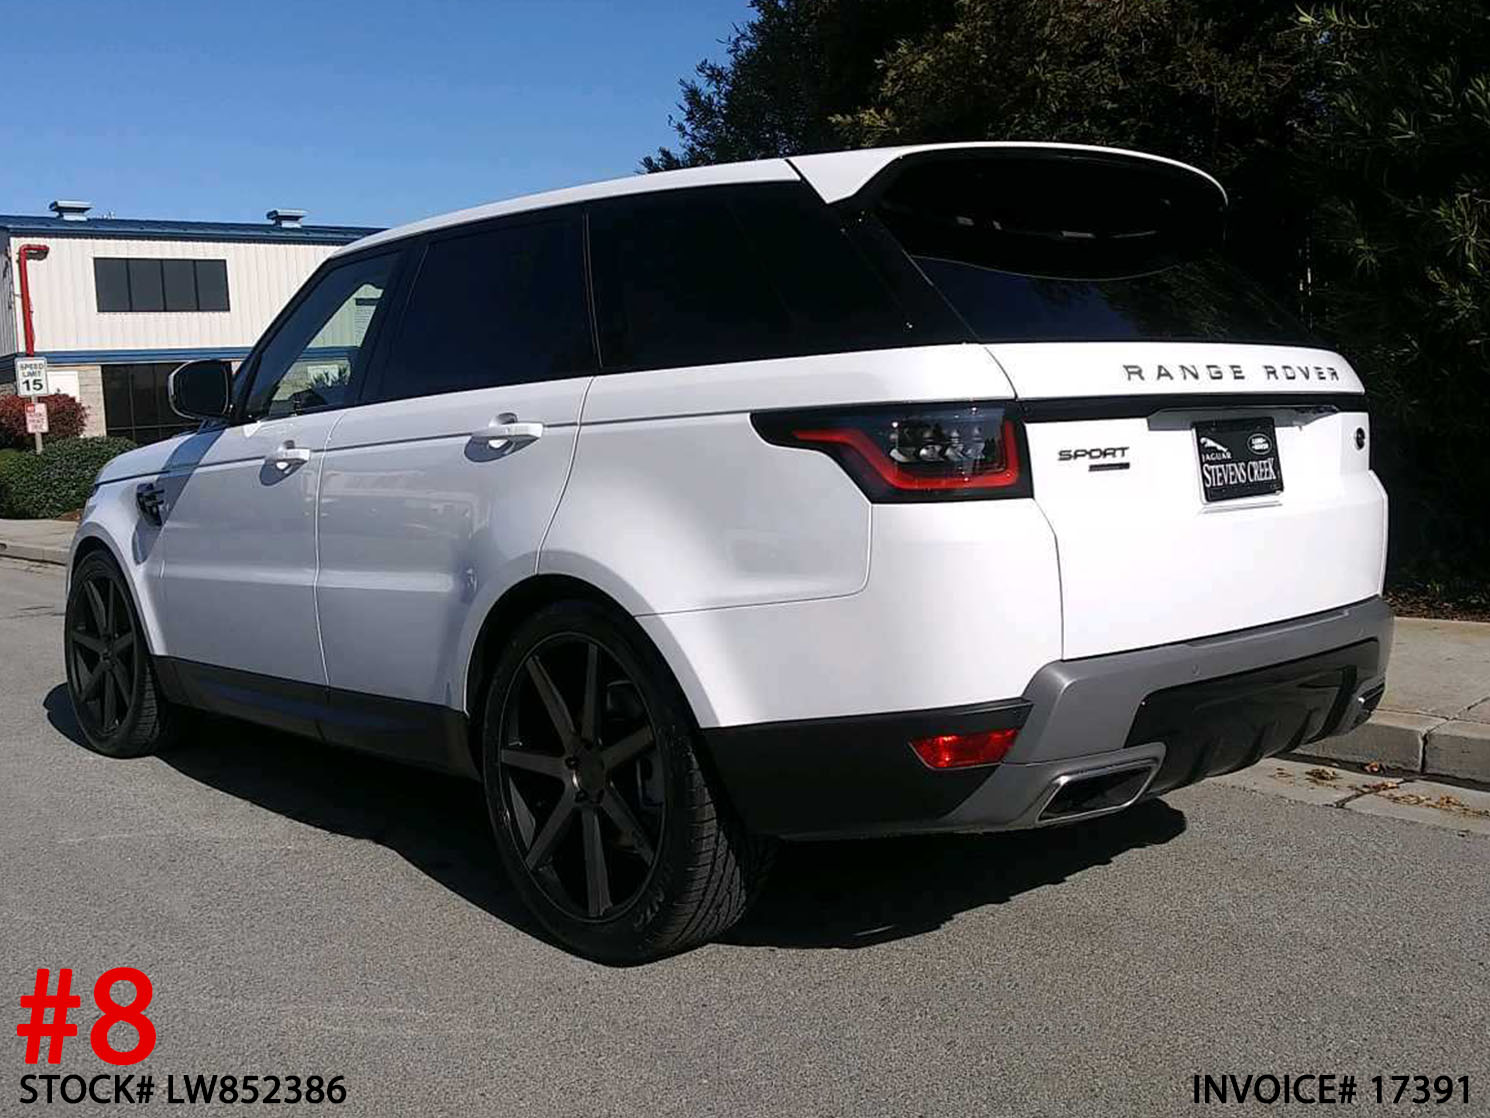 17 HQ Photos Range Rover Sports Truck Song - 2014 Range Rover Sport Earns Petersen's 4x4 of the Year ...